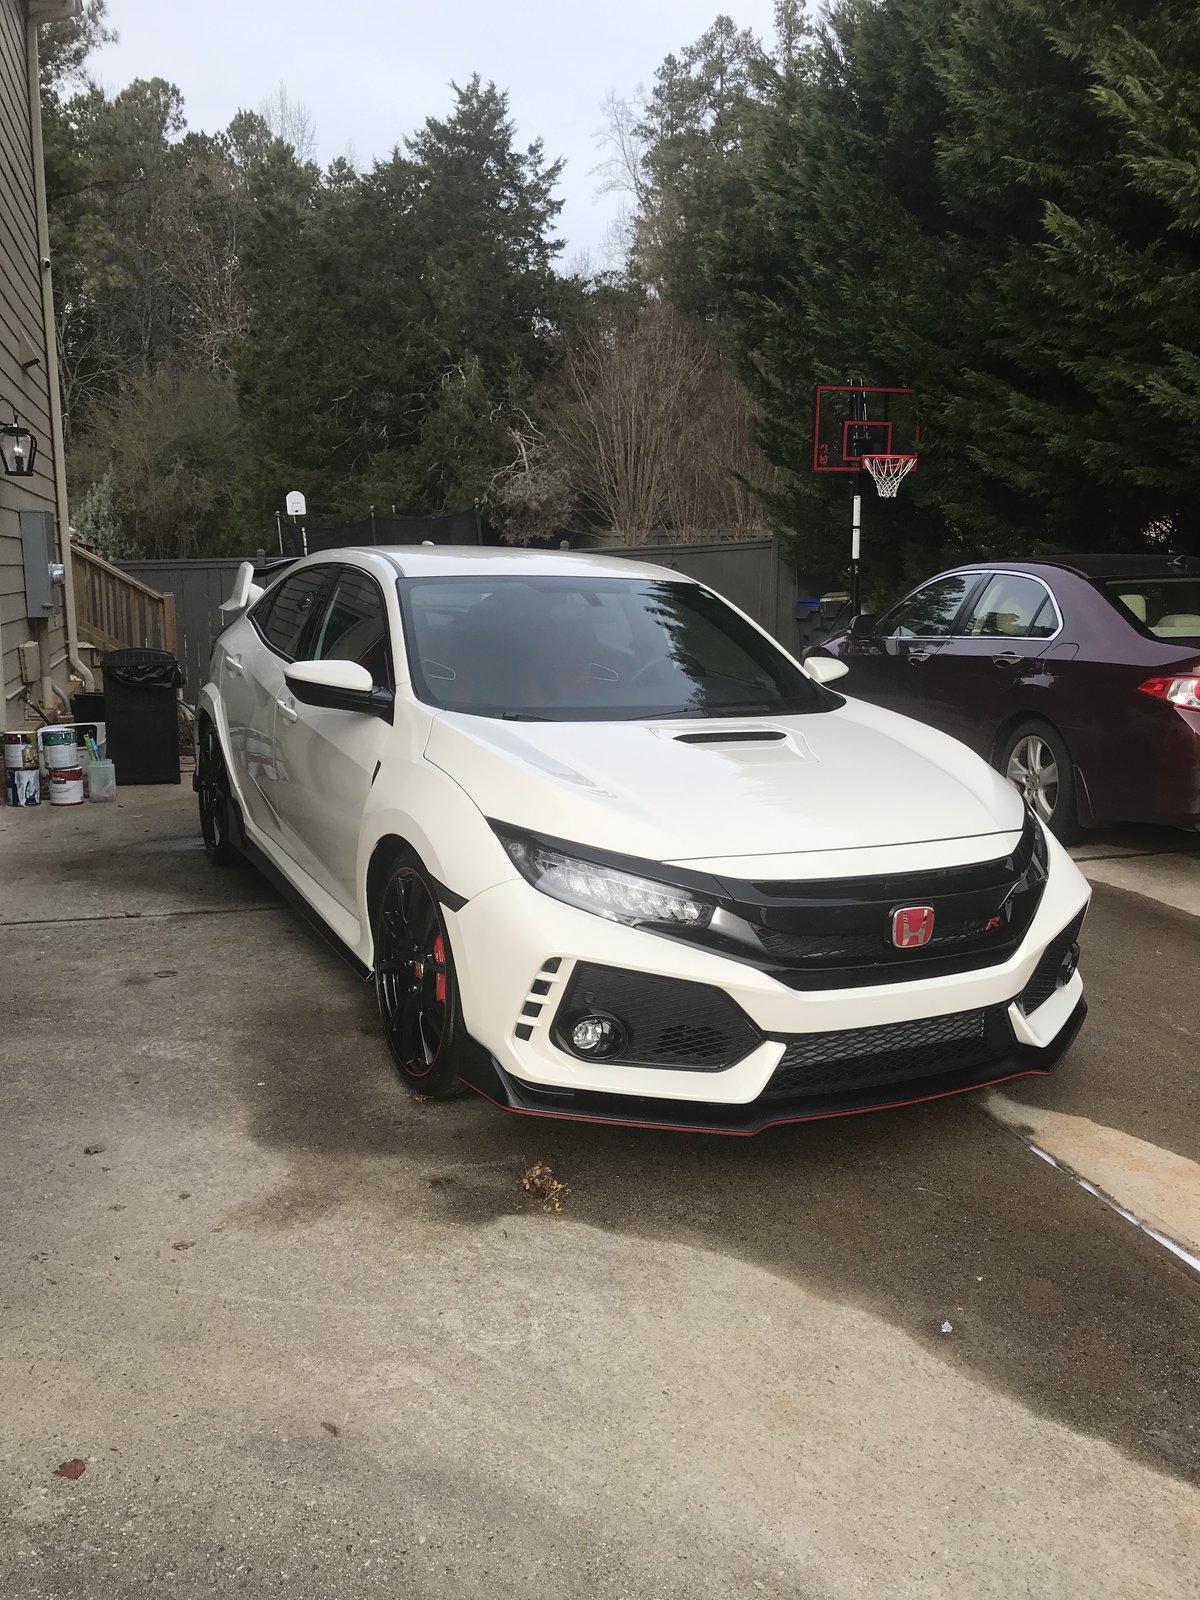 Honda Civic 10th gen Official Championship White Type R Picture Thread Washed